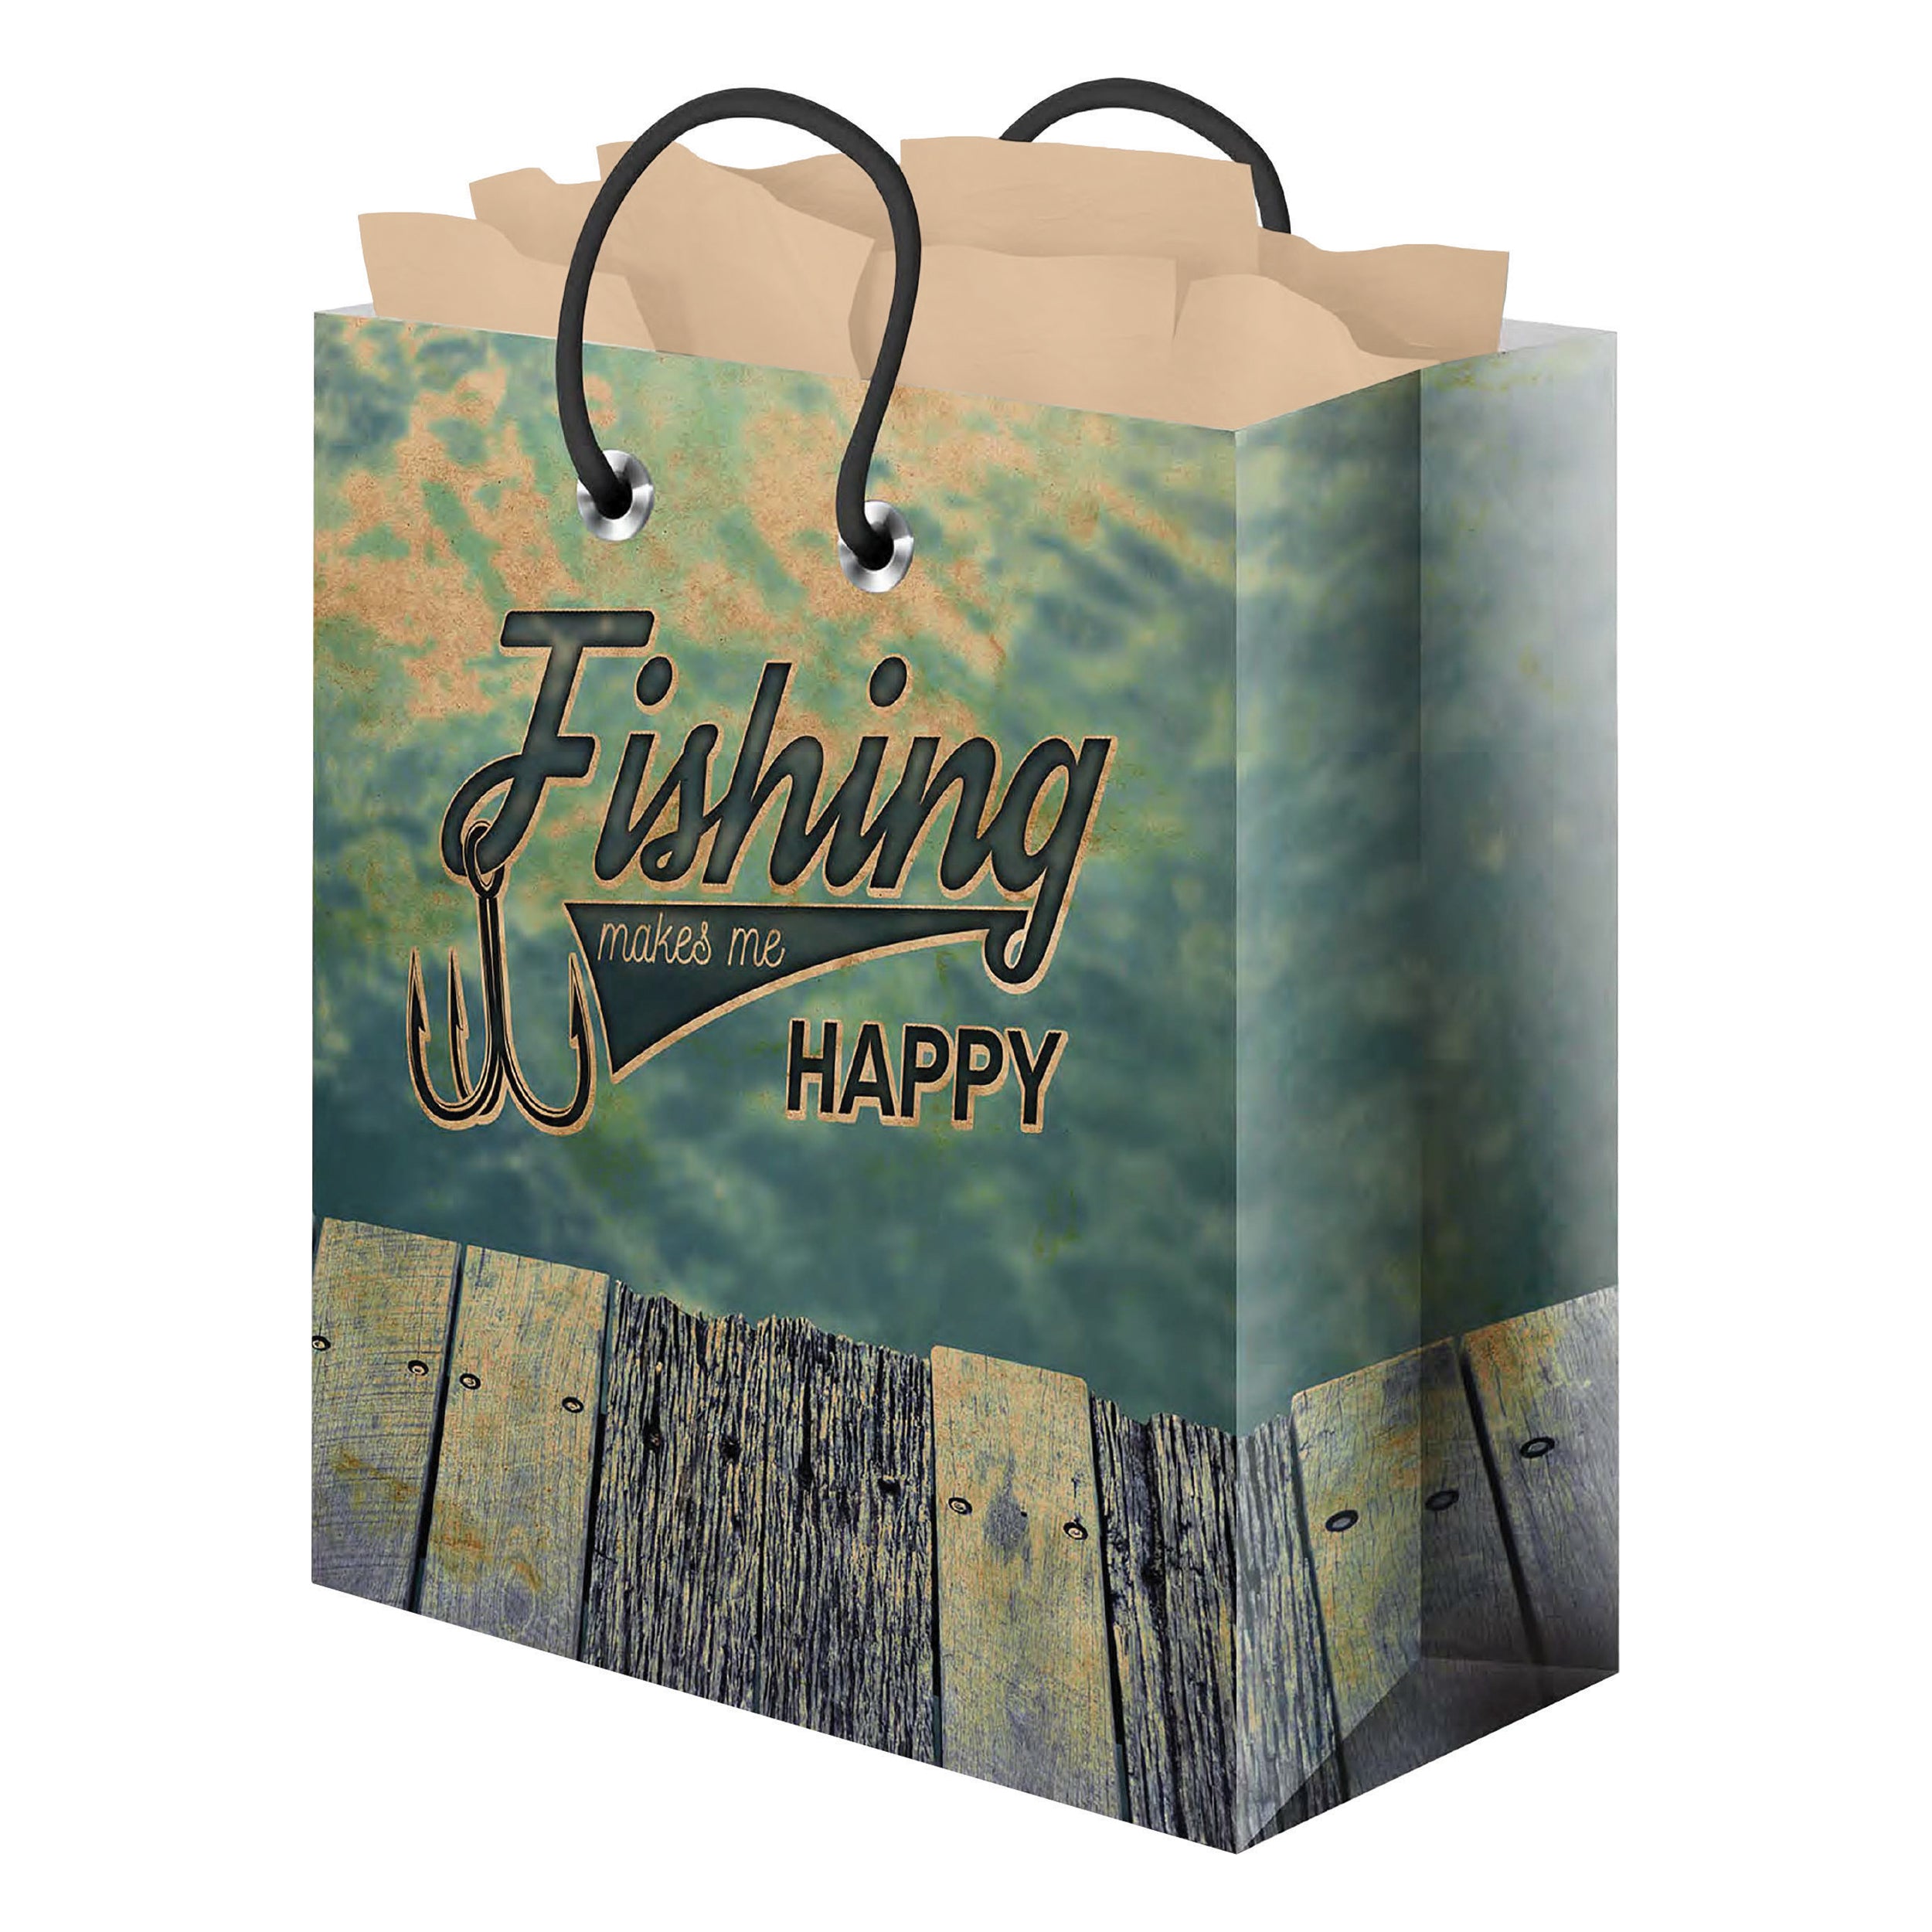 Gift Bag Medium with Tissue Paper - Fishing Happy – Rivers Edge